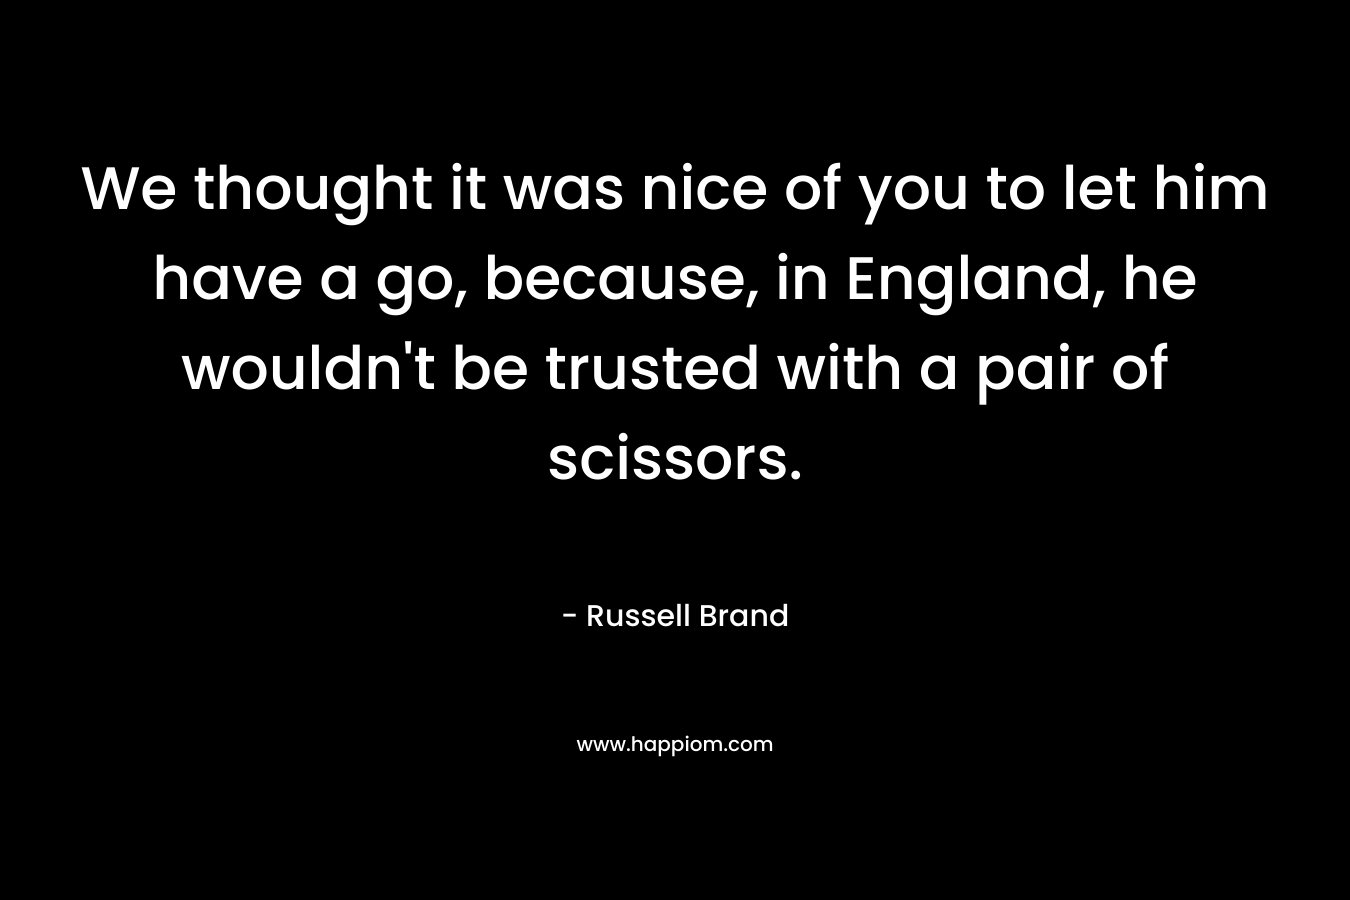 We thought it was nice of you to let him have a go, because, in England, he wouldn’t be trusted with a pair of scissors. – Russell Brand